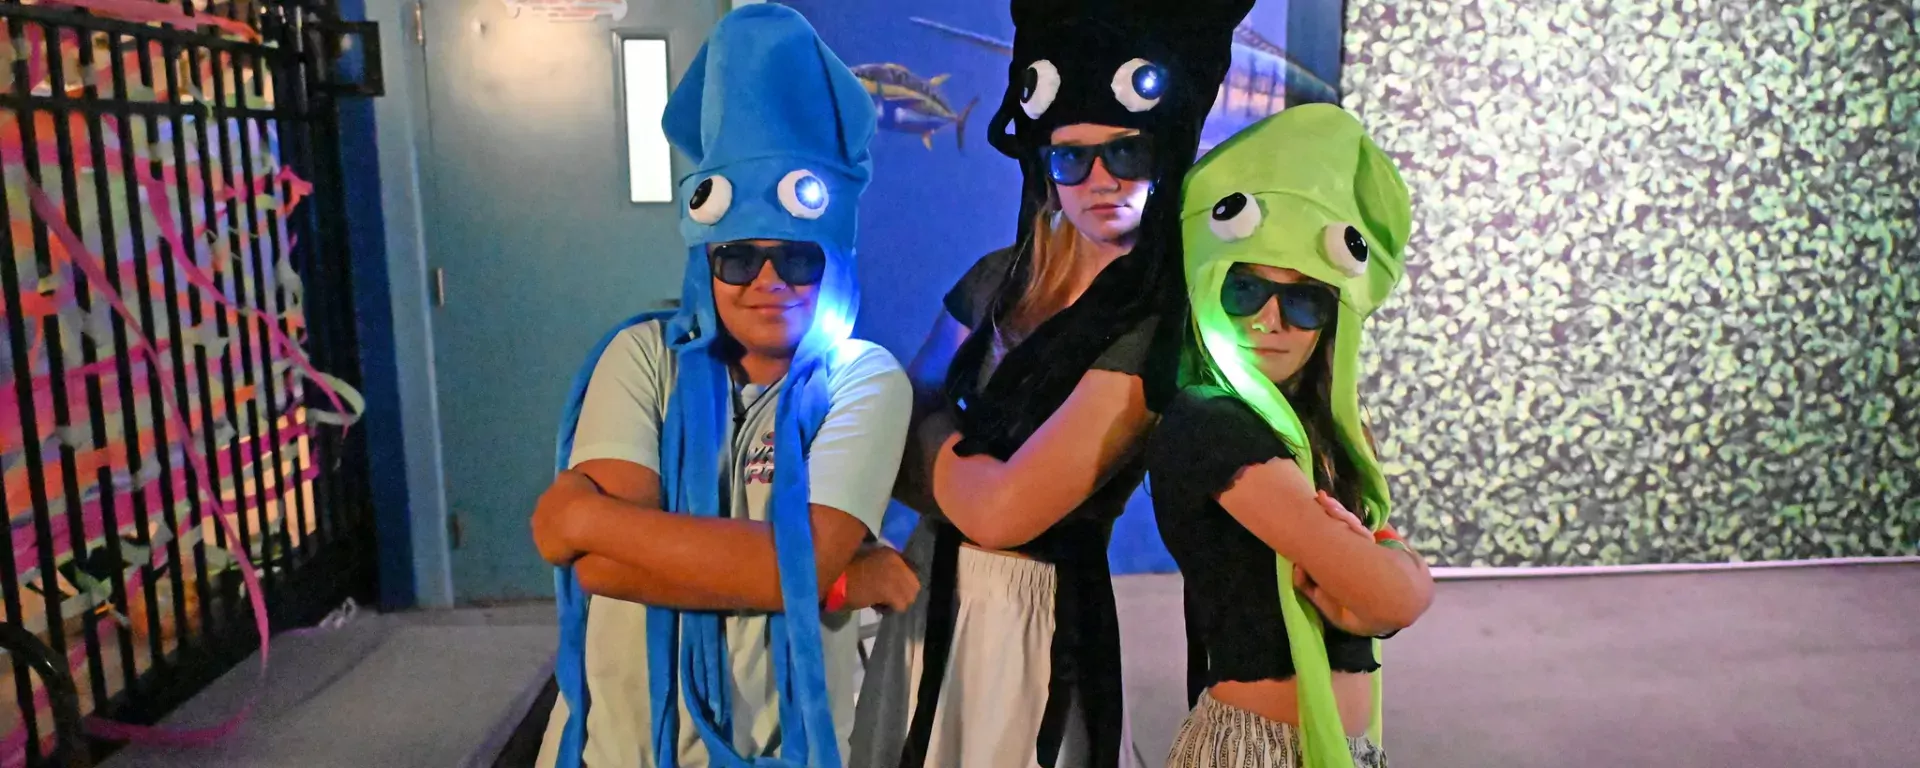 Teens dressed with squid hats at Sailfish Splash Waterpark during a teen night event.